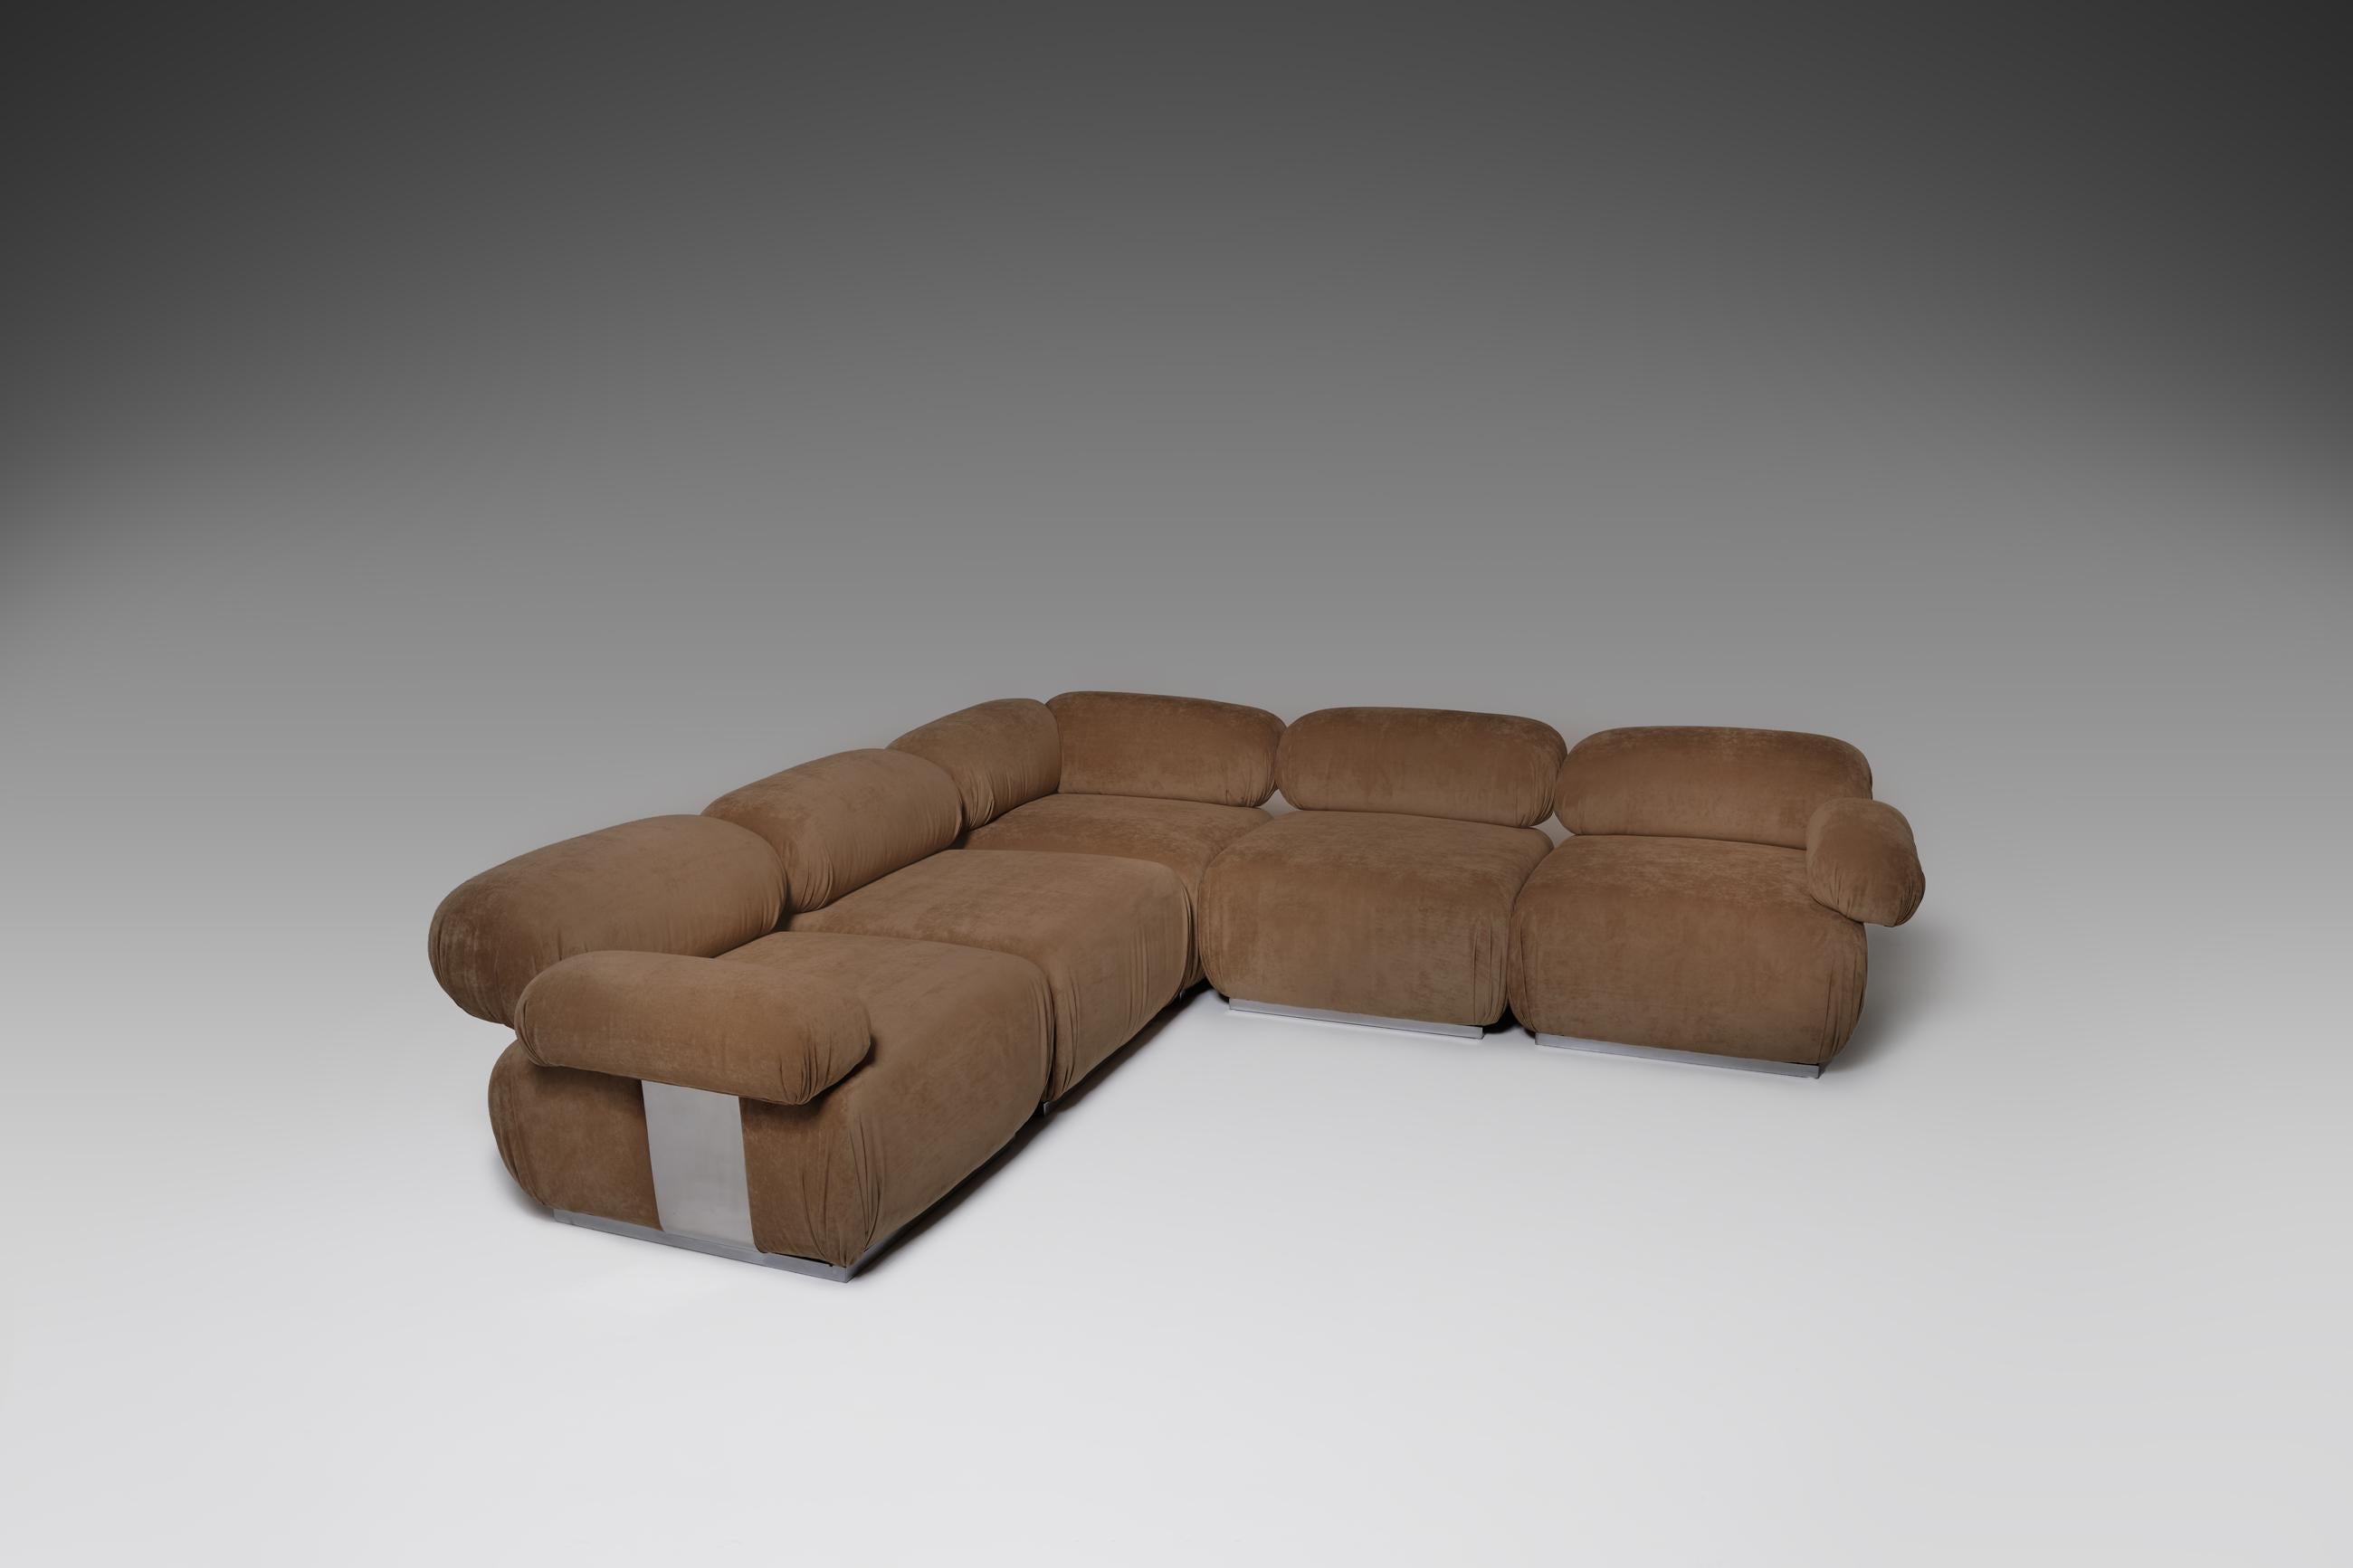 Stunning modular sofa 'Il Colombaccio' by Roberto Iera for Felice Rossi, Italy 1970. The sofa is composed of different large scale block units upholstered in a sand colored velvet which contrasts beautifully with the folded polished stainless steel